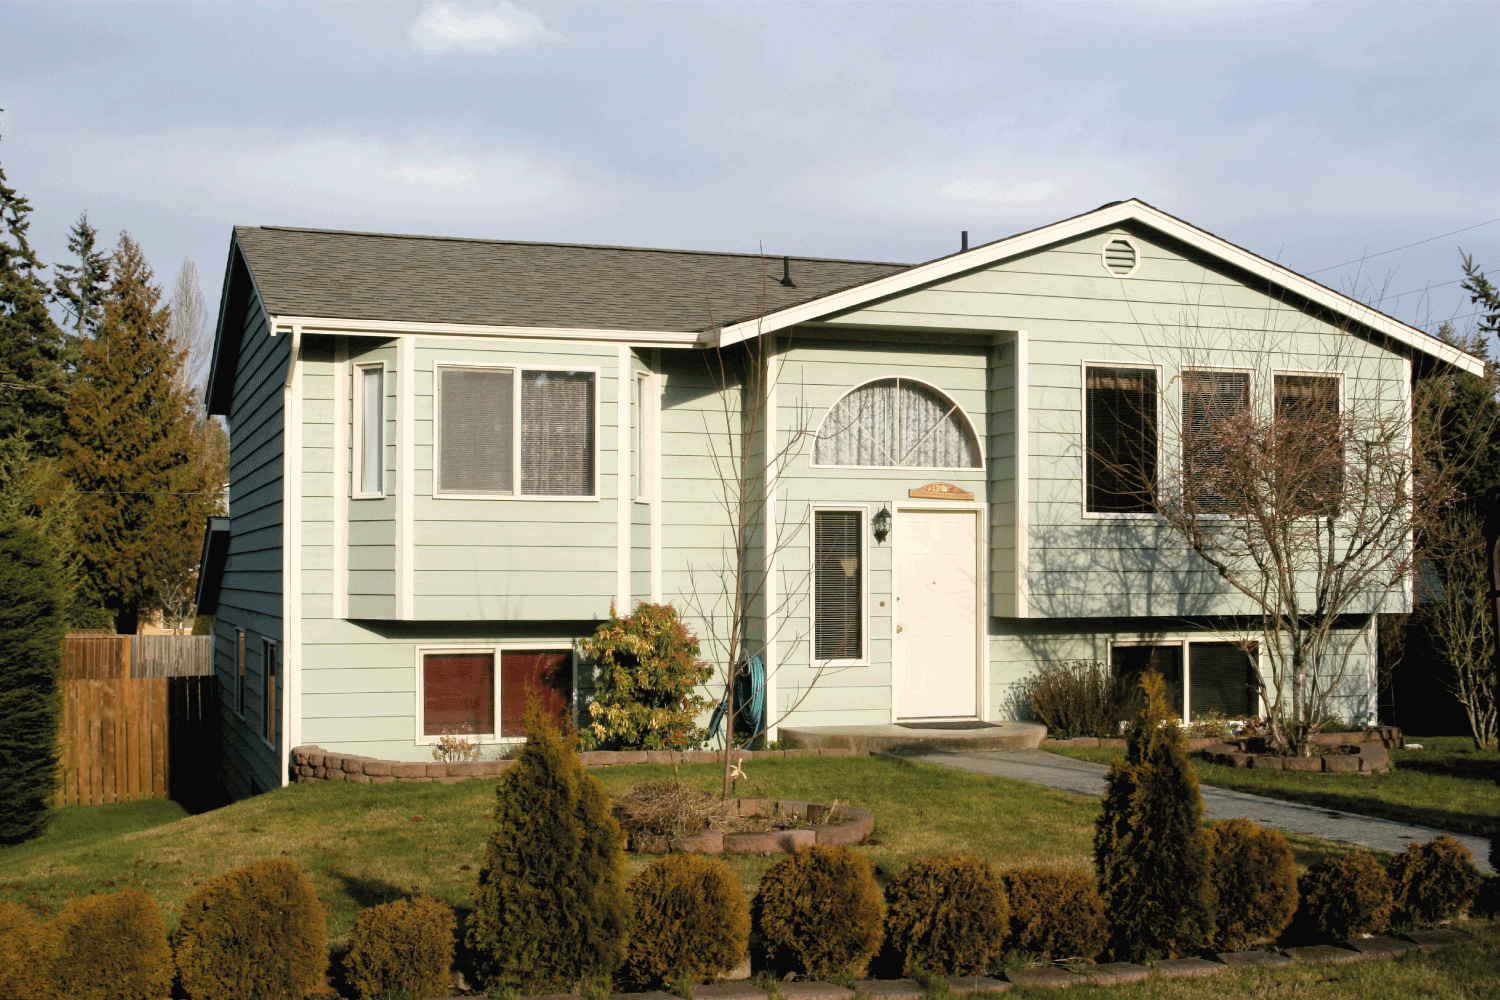 Typical Split Level Home of the 1980s